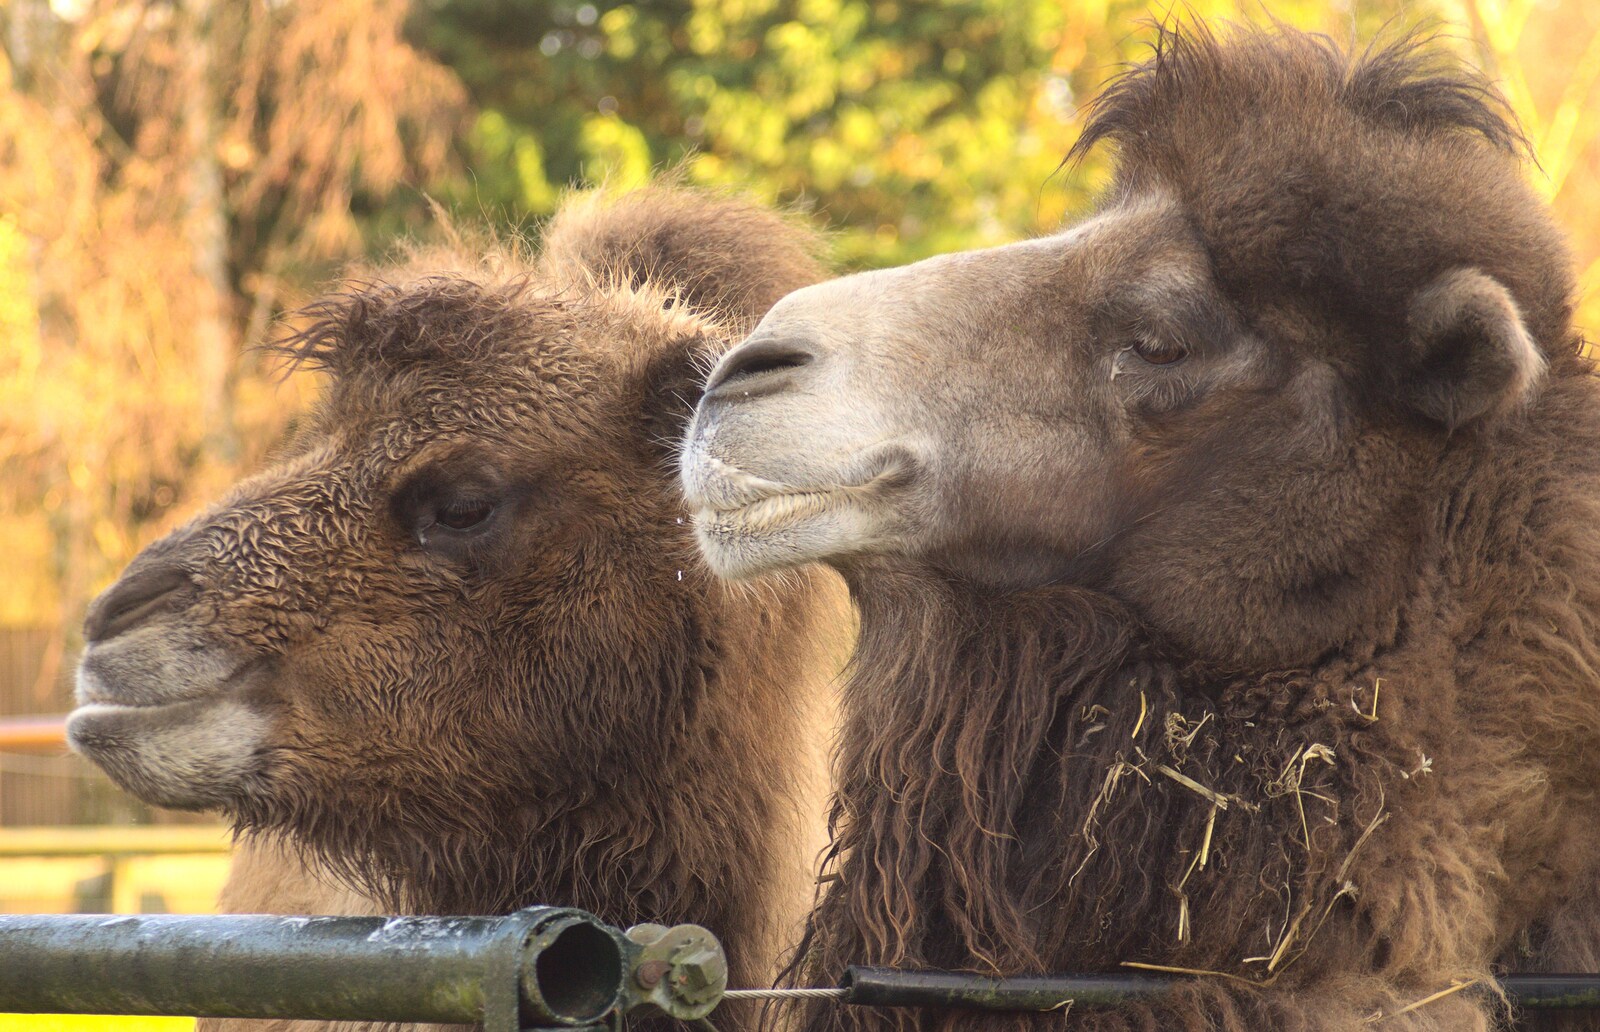 A couple of camels discuss the day's events from Trips to Banham Zoo and Norwich, Norfolk - 2nd January 2012